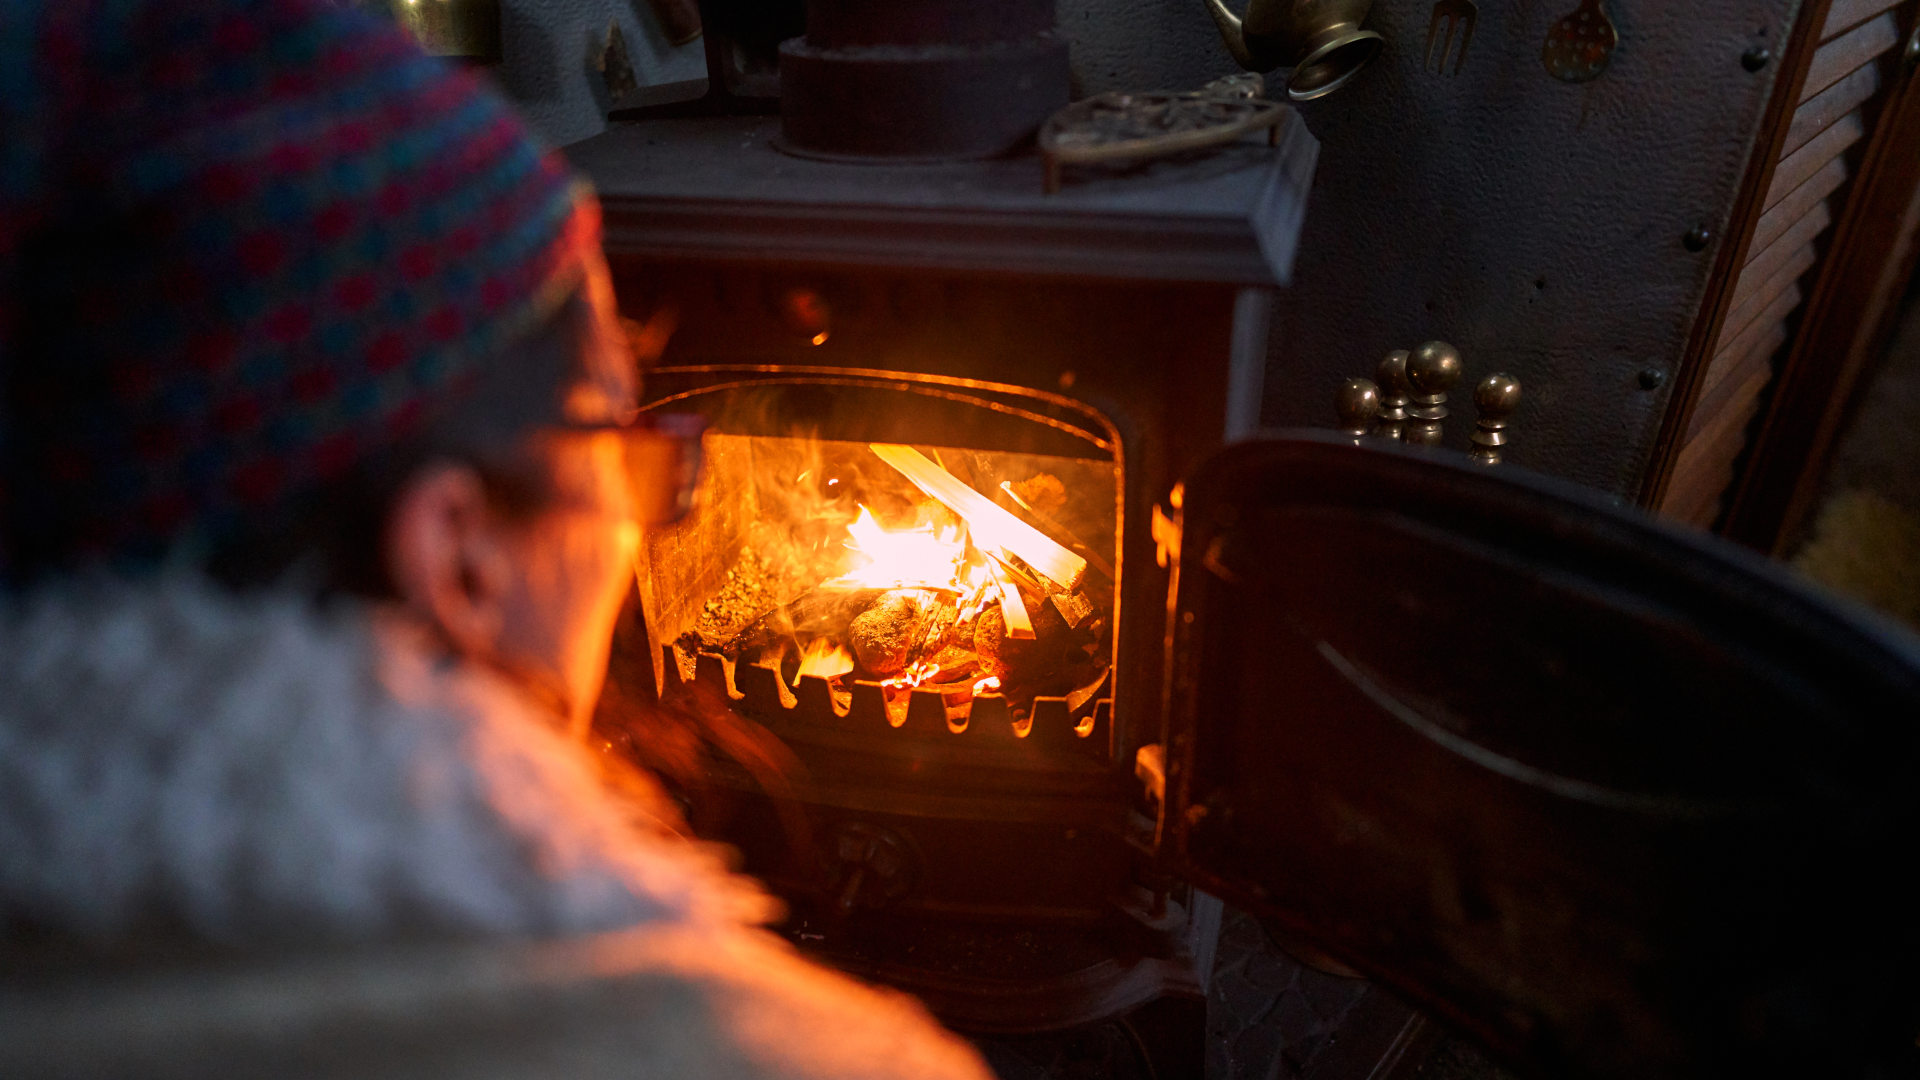 What Not to Burn in Your Wood-Burner - Direct Stoves